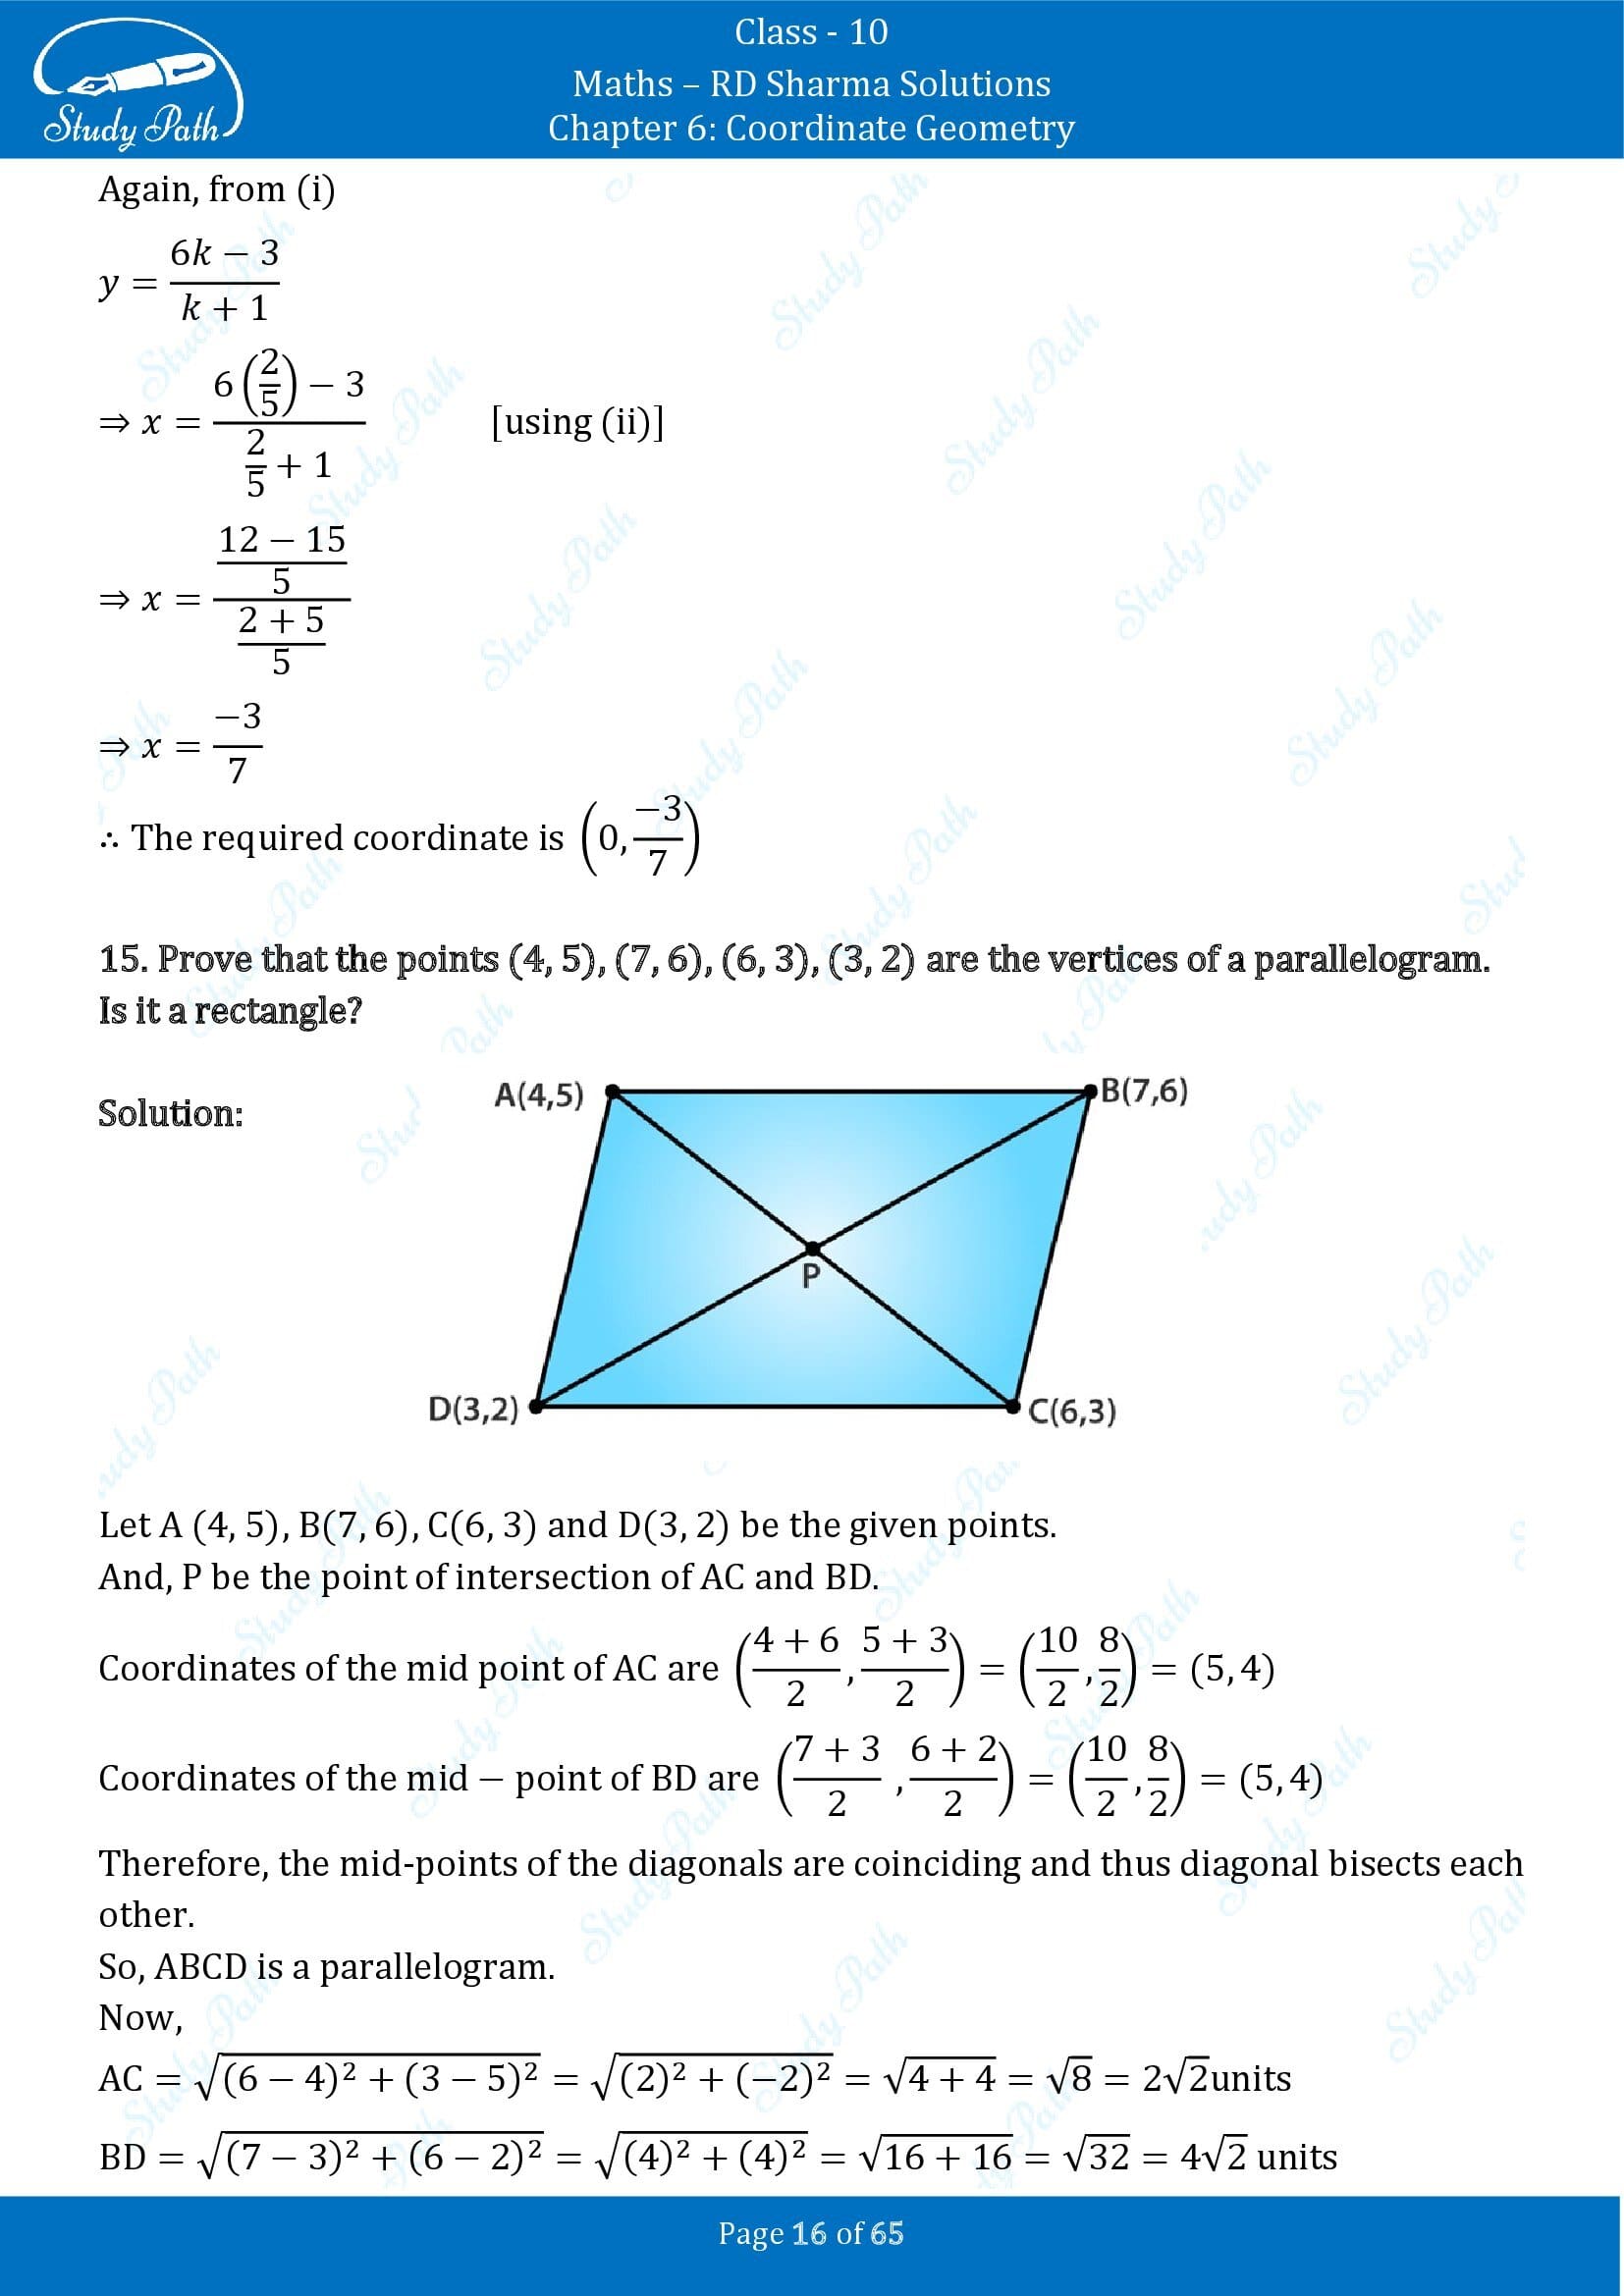 RD Sharma Solutions Class 10 Chapter 6 Coordinate Geometry Exercise 6.3 00016